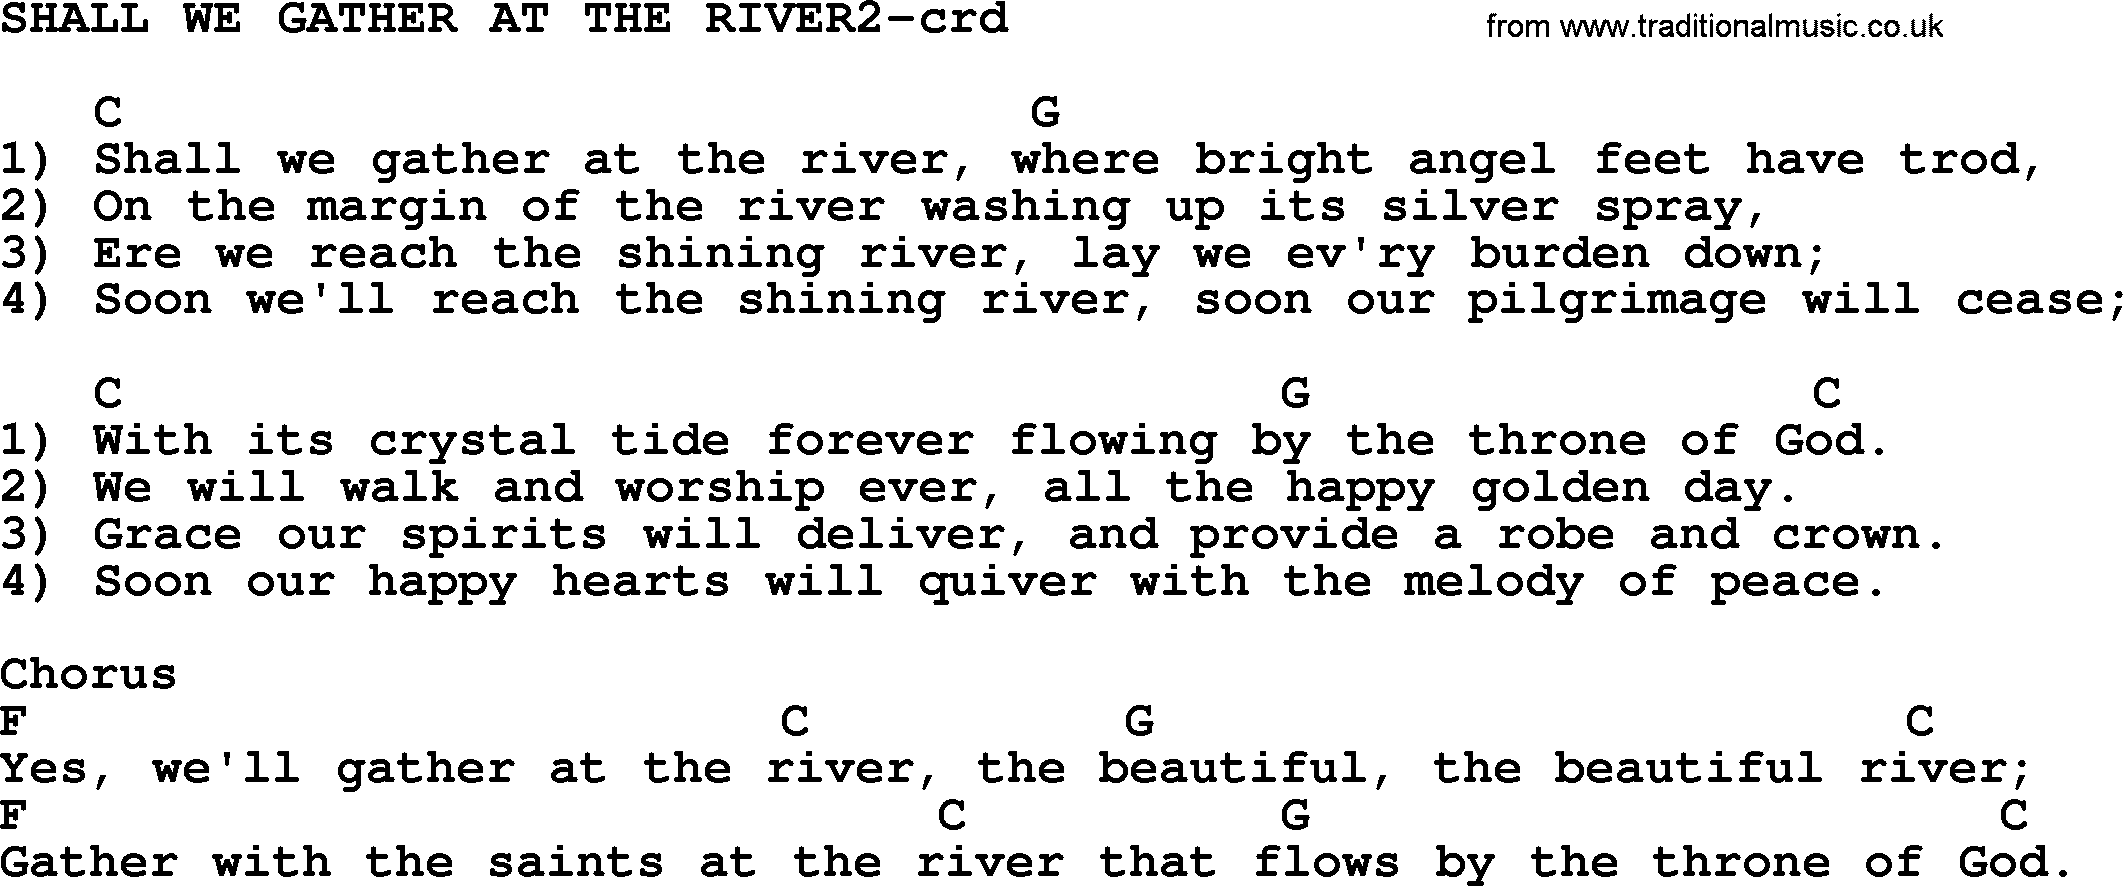 Top 500 Hymn: Shall We Gather At The River2, lyrics and chords